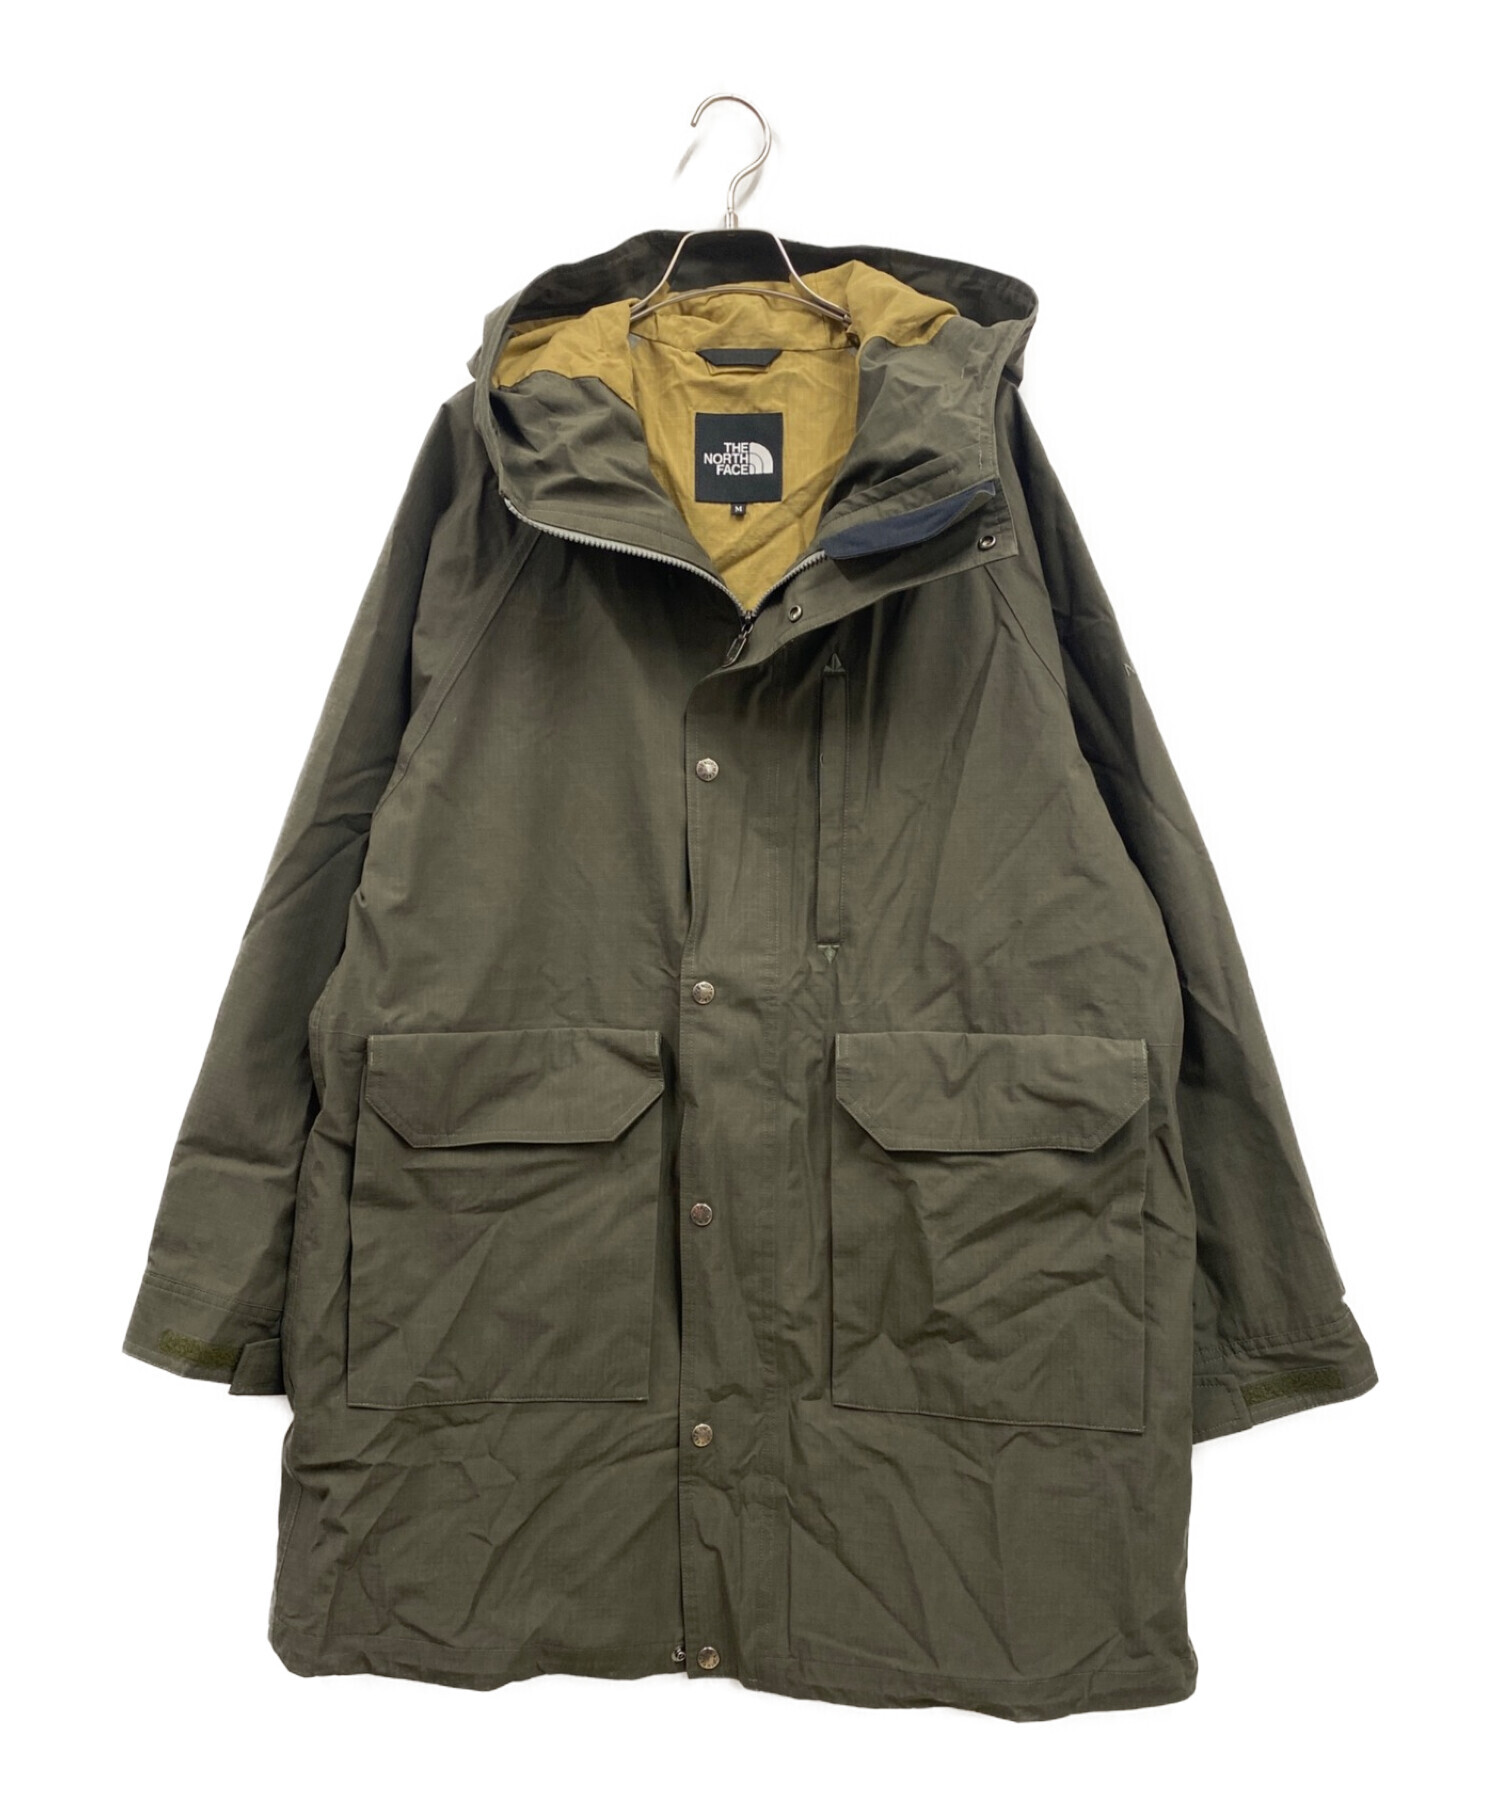 THE NORTH FACE ZI Magne Mountain Coat 【おトク】 - ジャケット 